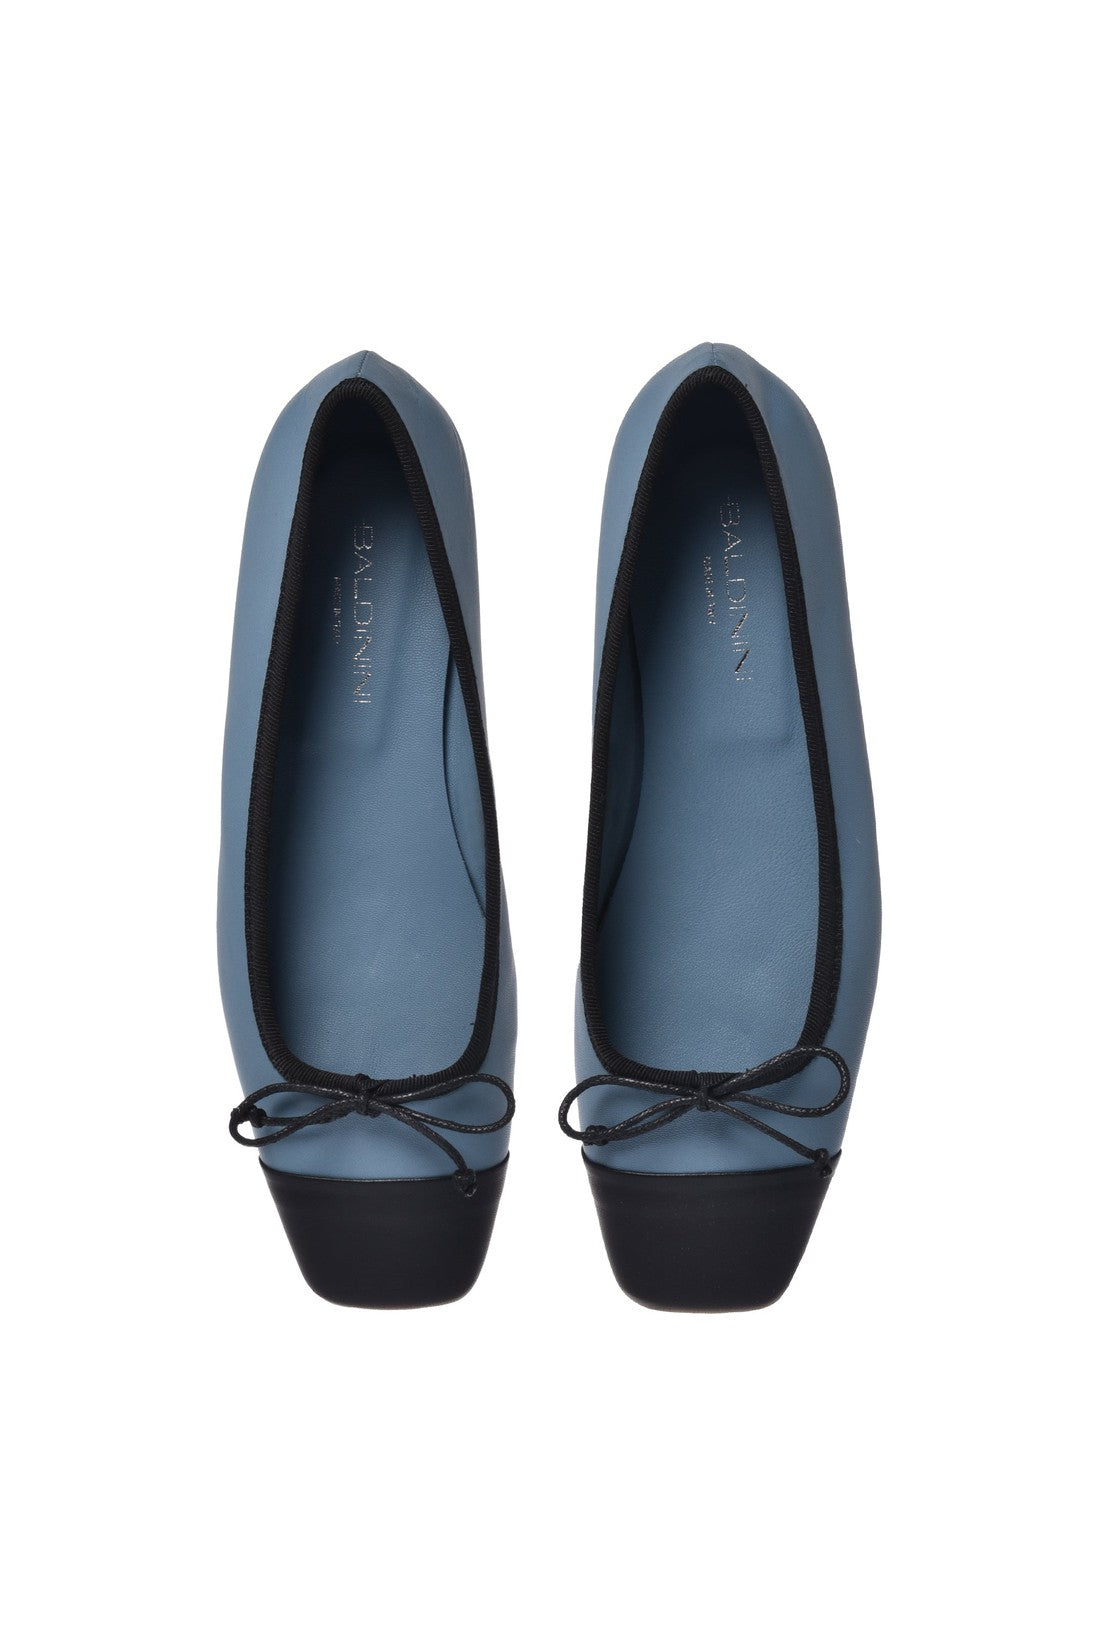 BALDININI-OUTLET-SALE-Ballerina-pump-in-black-and-blue-nappa-leather-Halbschuhe-ARCHIVE-COLLECTION-2_6a288a48-7847-4771-82eb-a198a90aca26.jpg